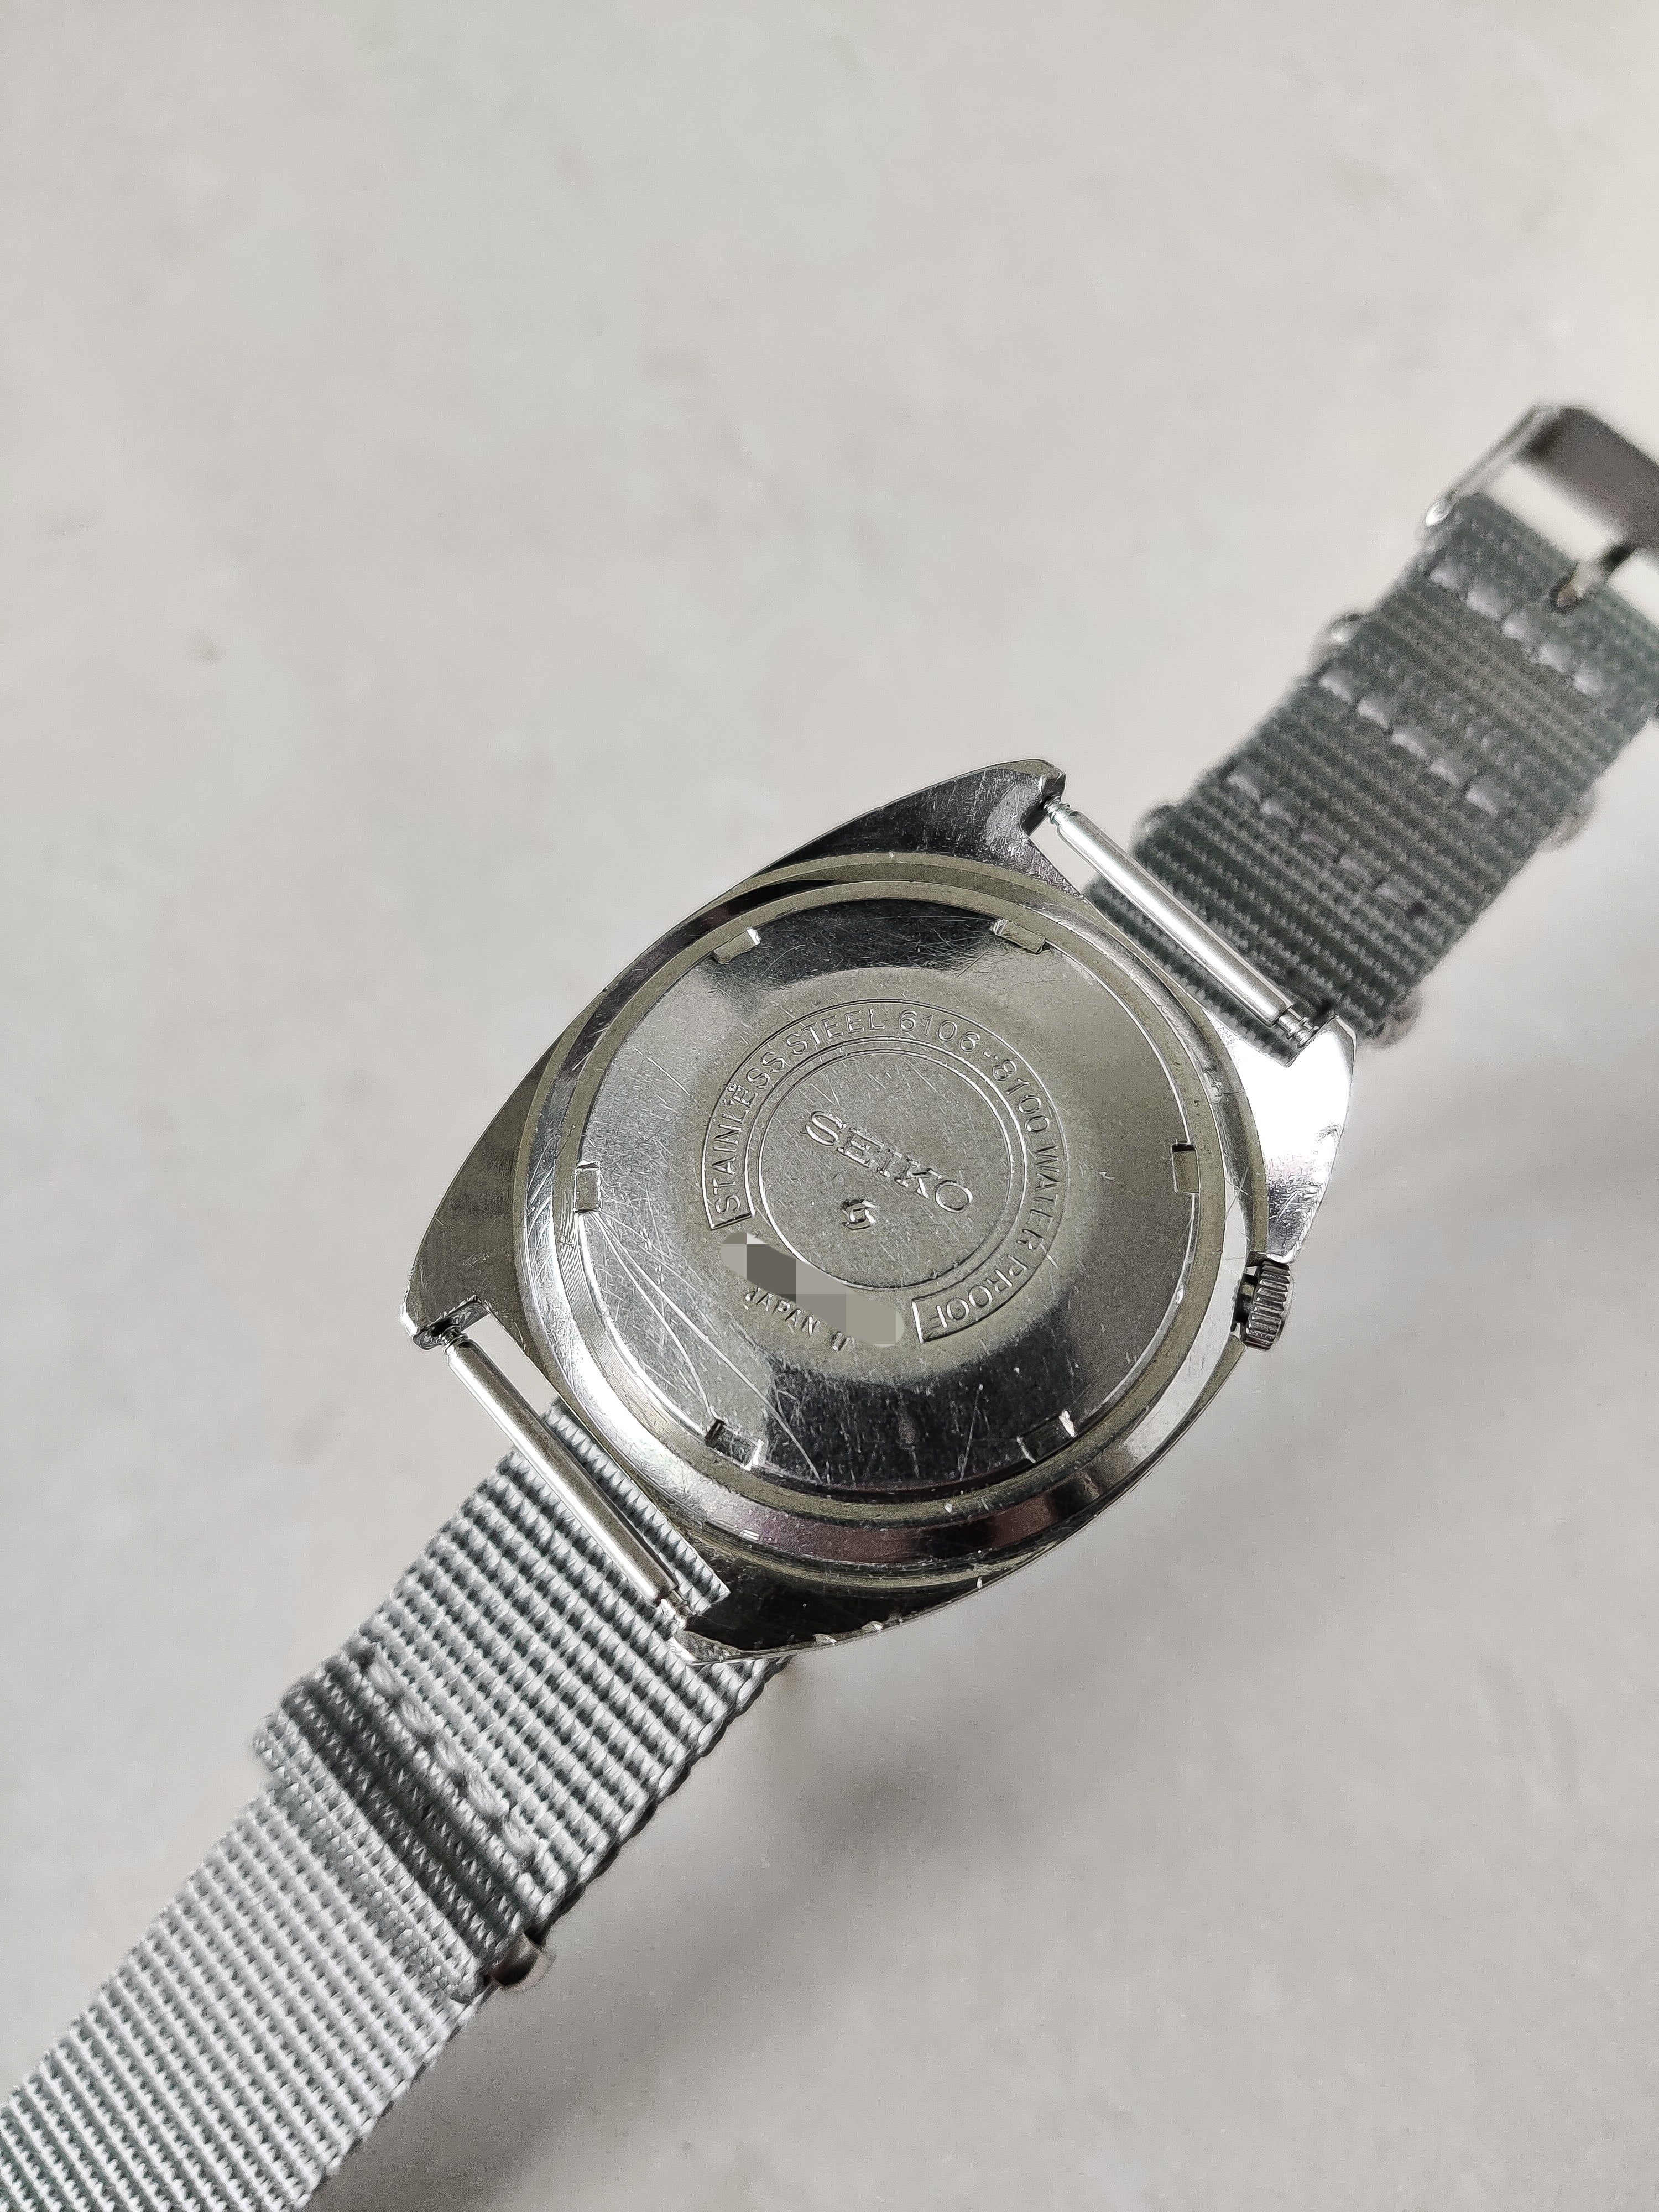 Seiko 6106-8100 "Proof" from 1970 (Tropical Dial)